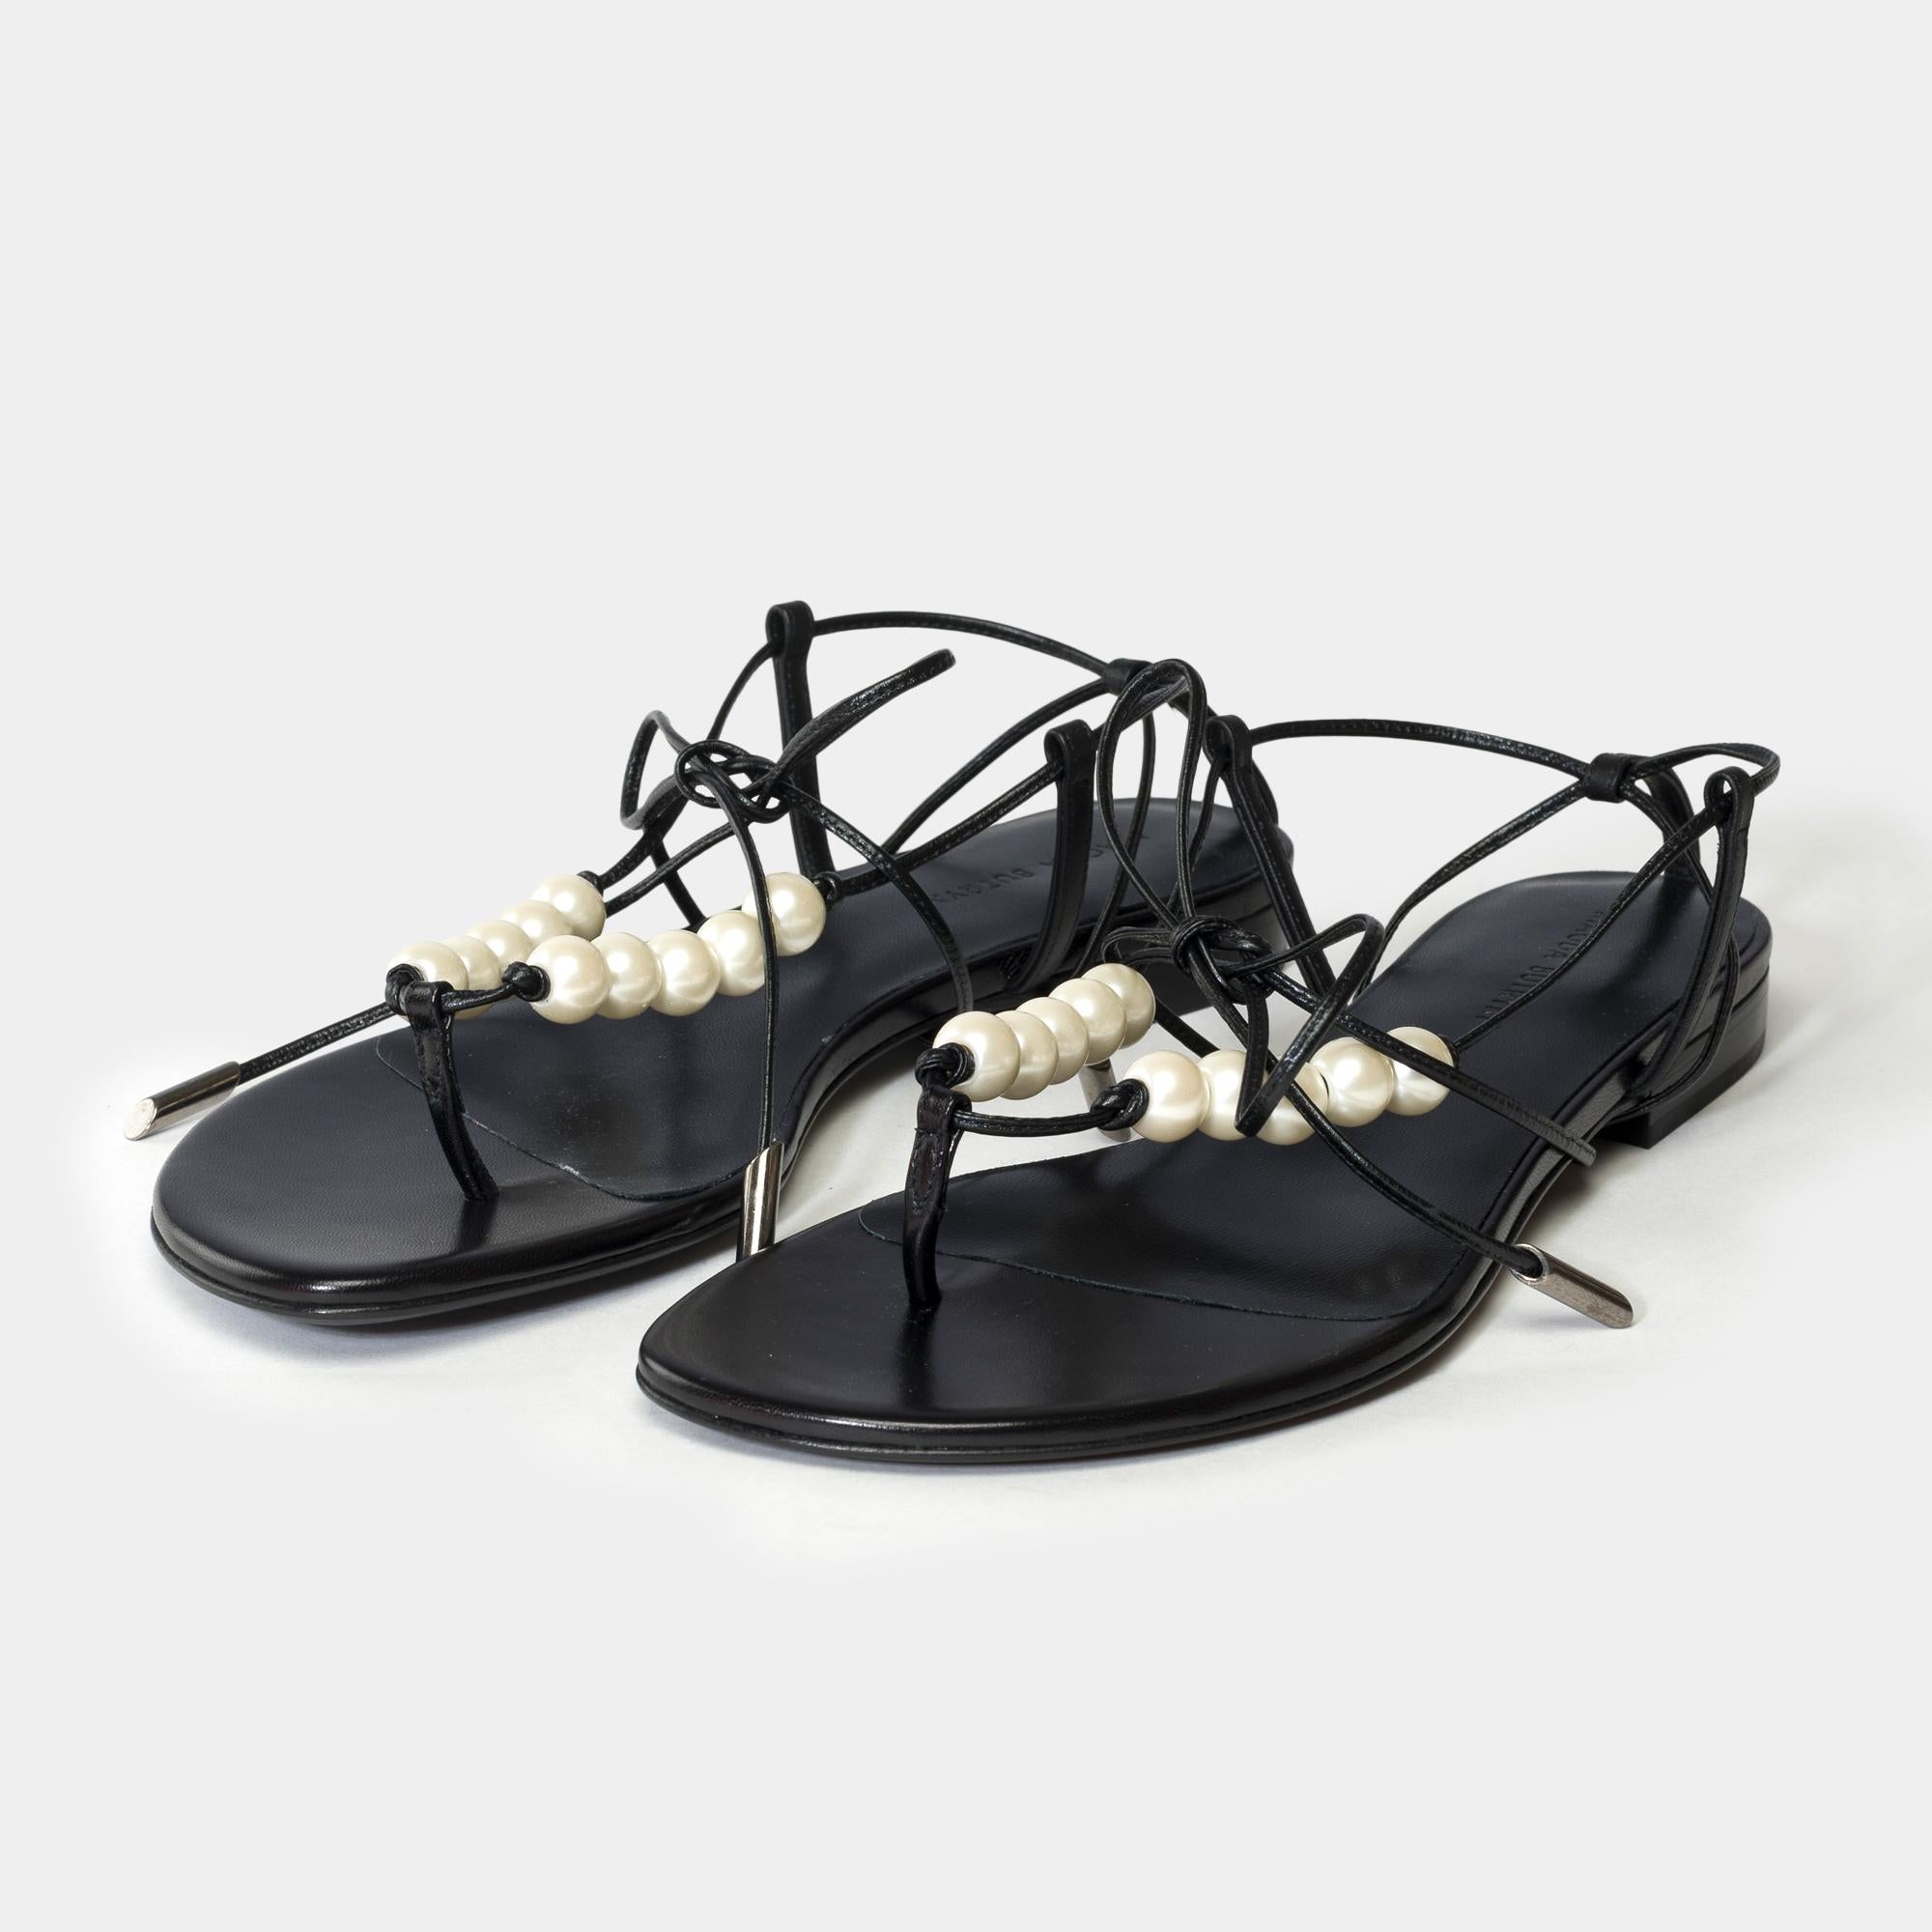 A​ ​simple​ ​flat​ ​sandal​ ​with​ ​strappy​ ​detailing.​ ​Reflecting​ ​the​ ​seasonal​ ​motives​ ​and​ ​brand's​ ​craft​ ​pearl​ ​beads​ ​are​ ​the​ ​newest​ ​detail
Upper​ ​Gros​ ​Grain​ ​100%​ ​Viscose​ ​Insole,​ ​Sole:​ ​100%​ ​Calf​